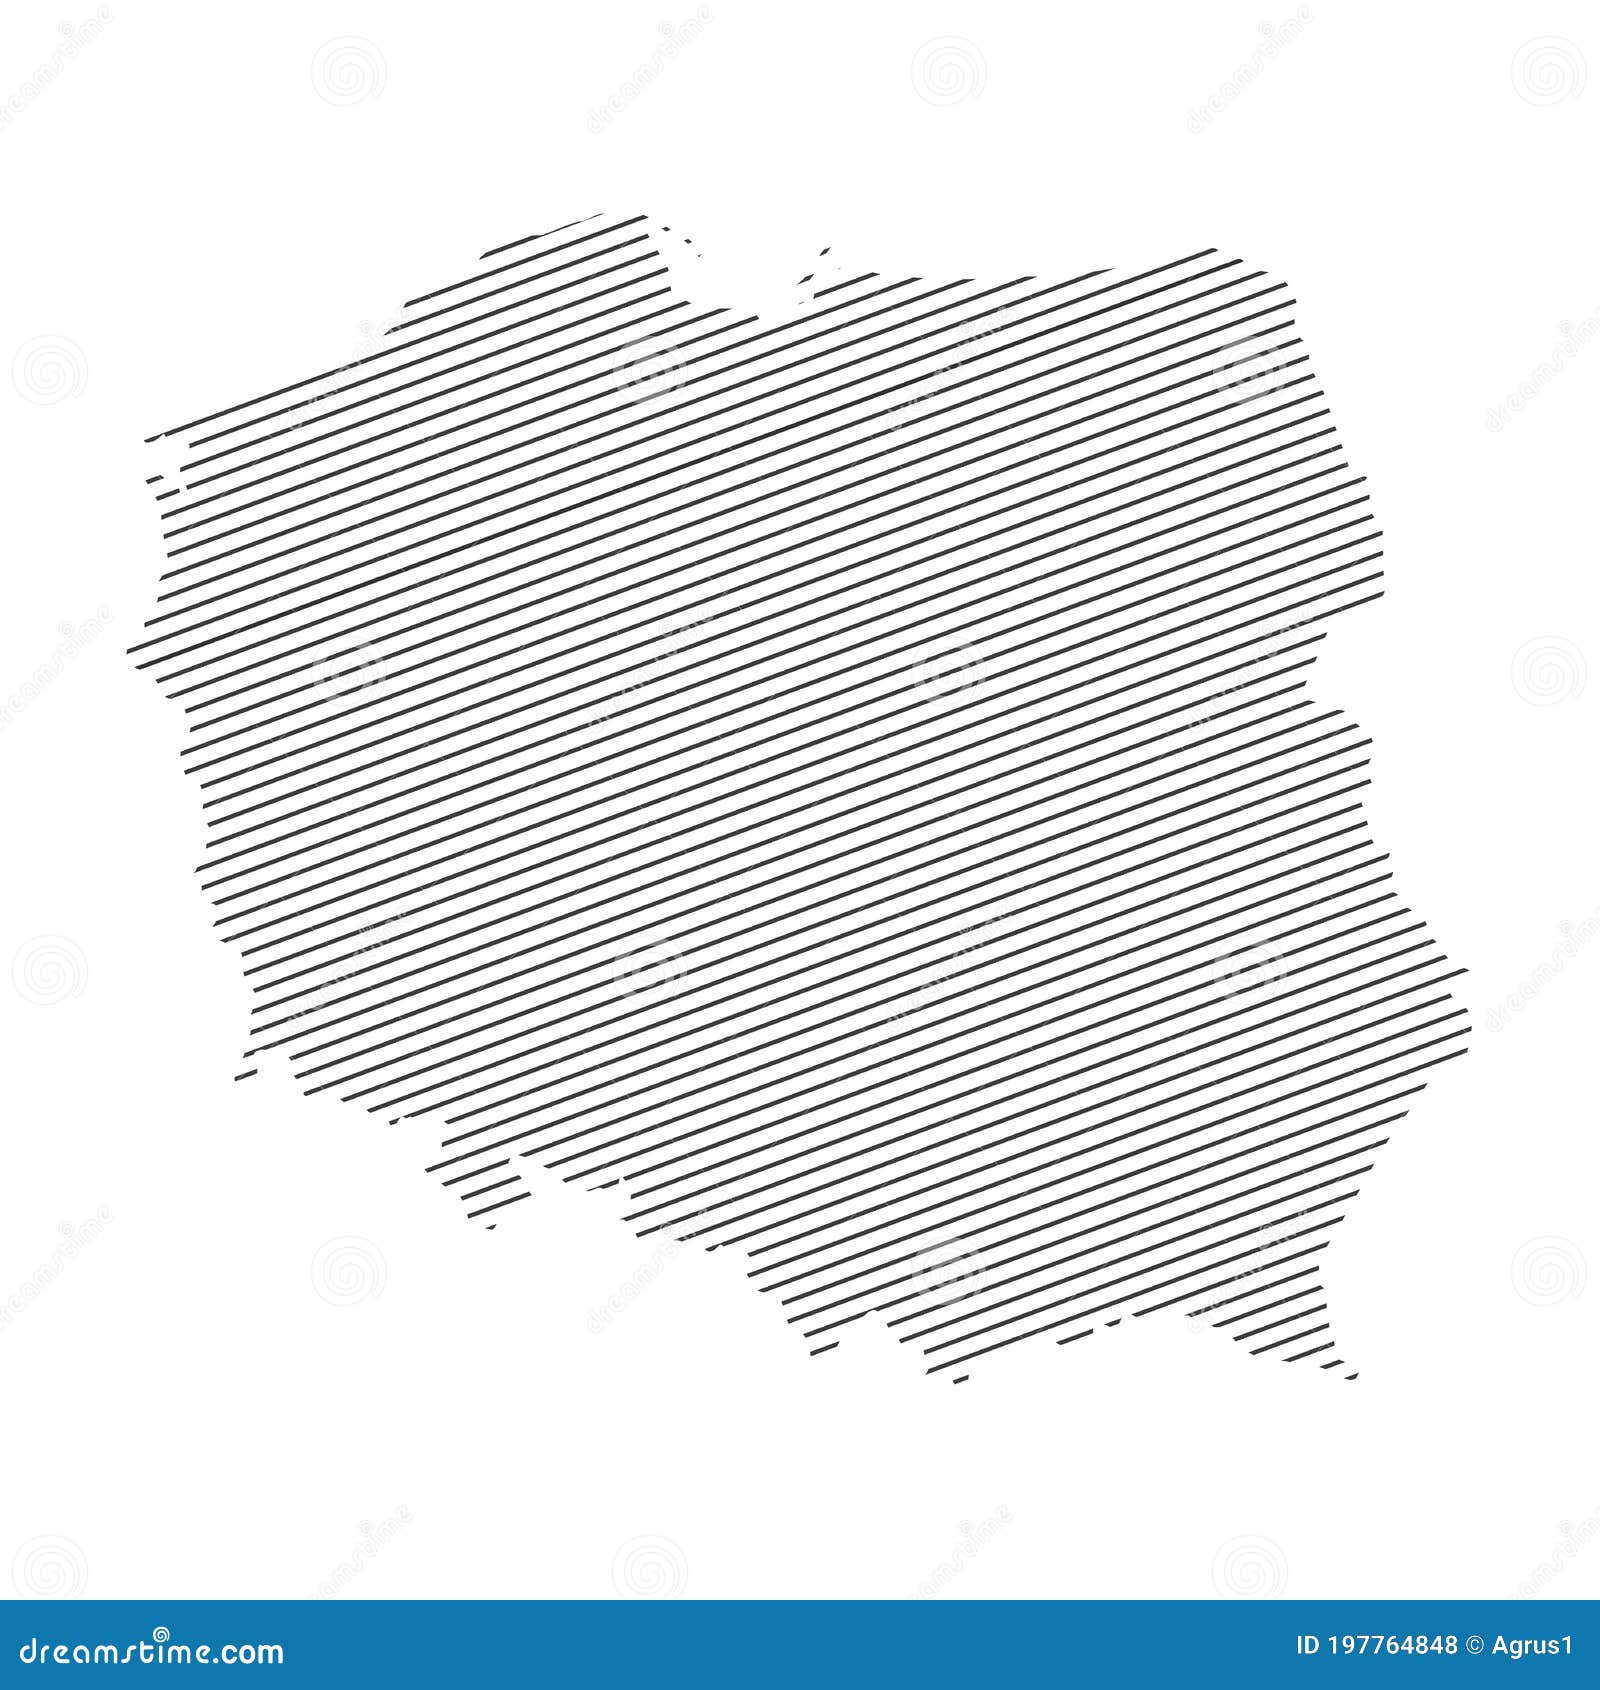 Poland Map Isolated On White Background. Vector Thin Line Border Map Of ...